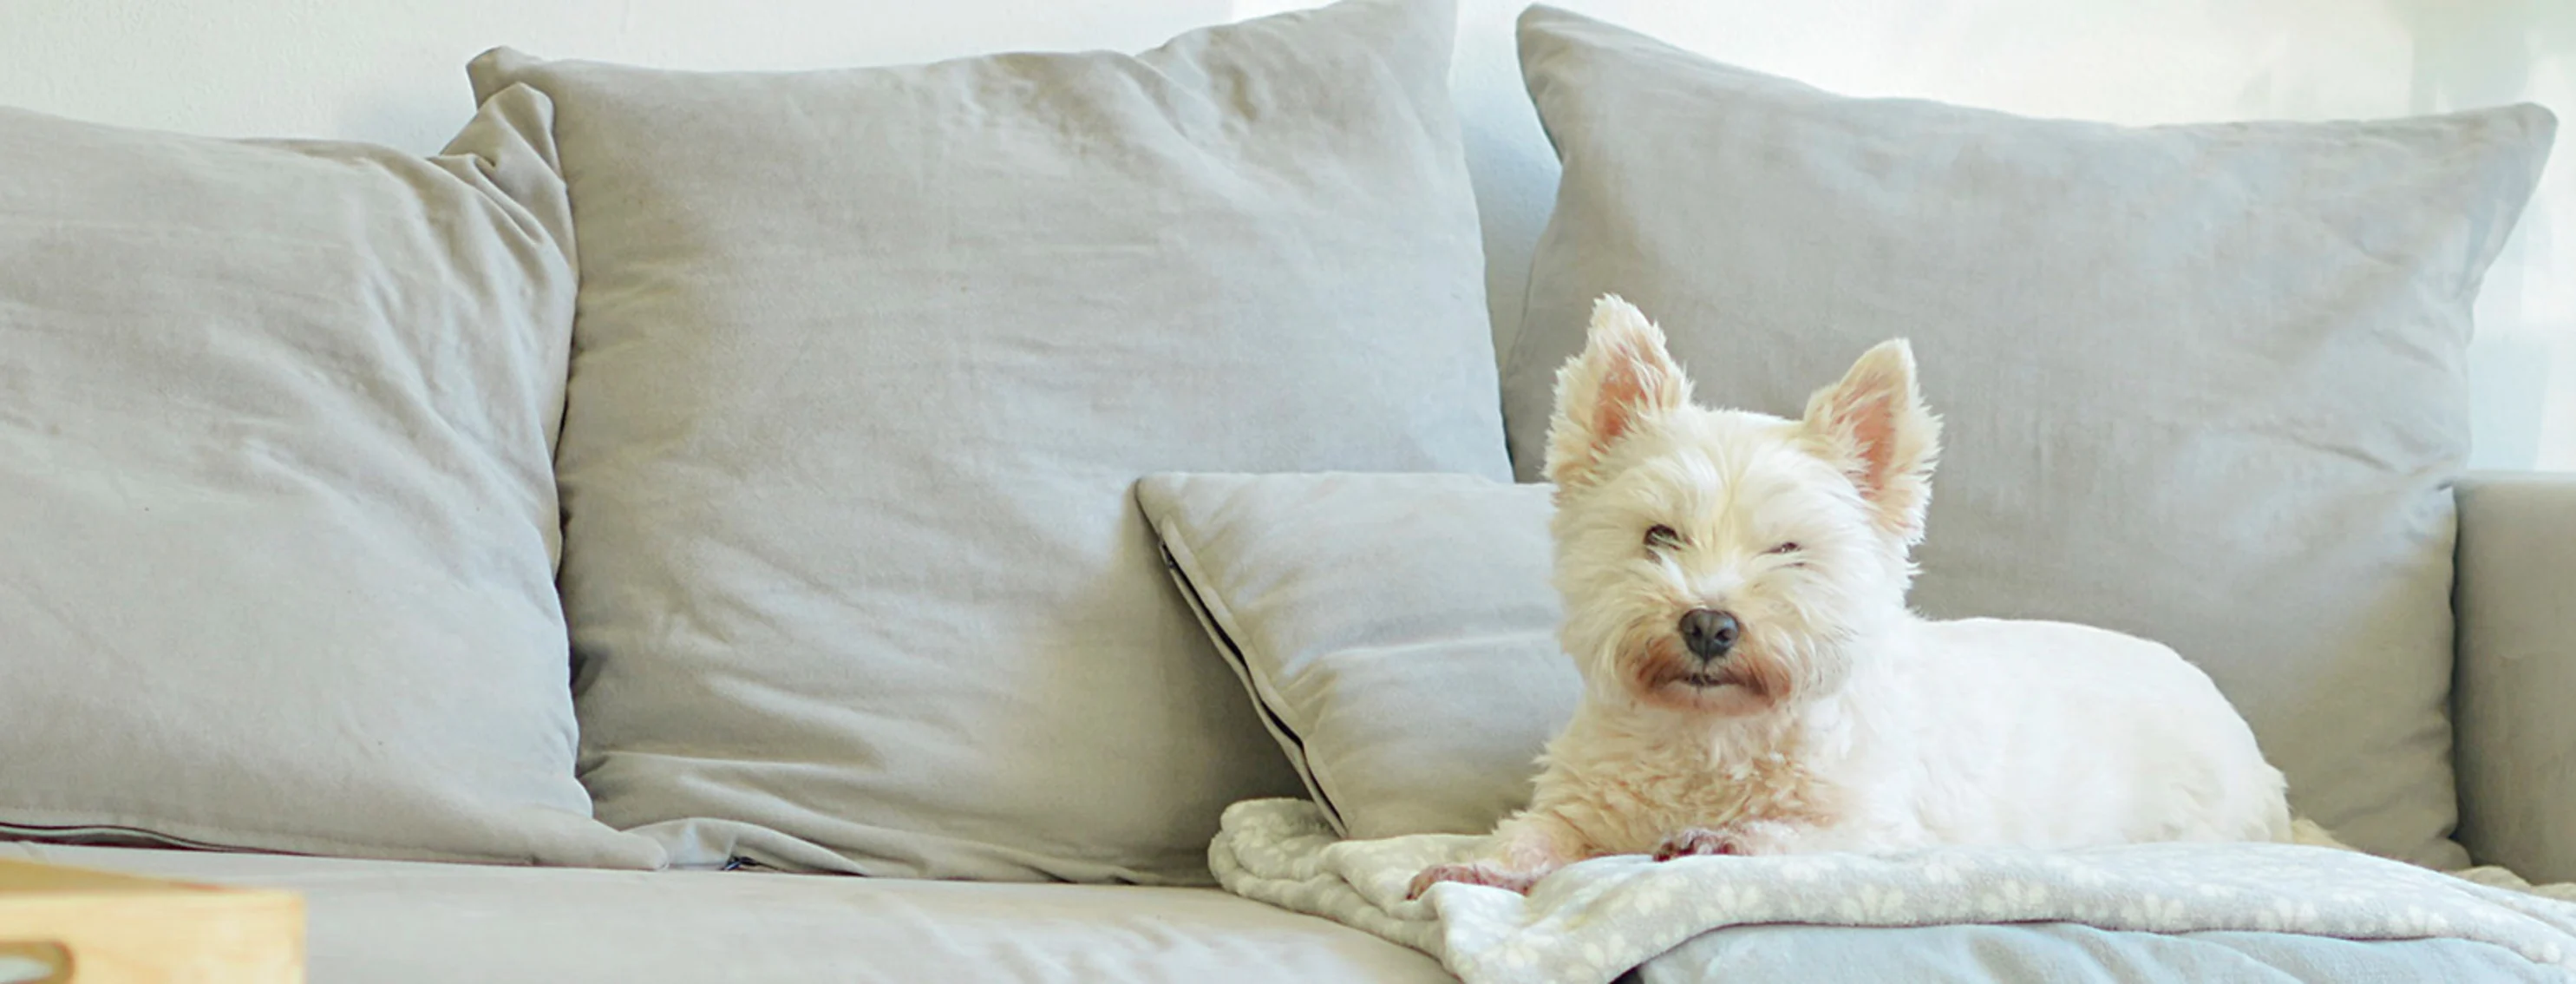 A small scruffy dog laying on a couch